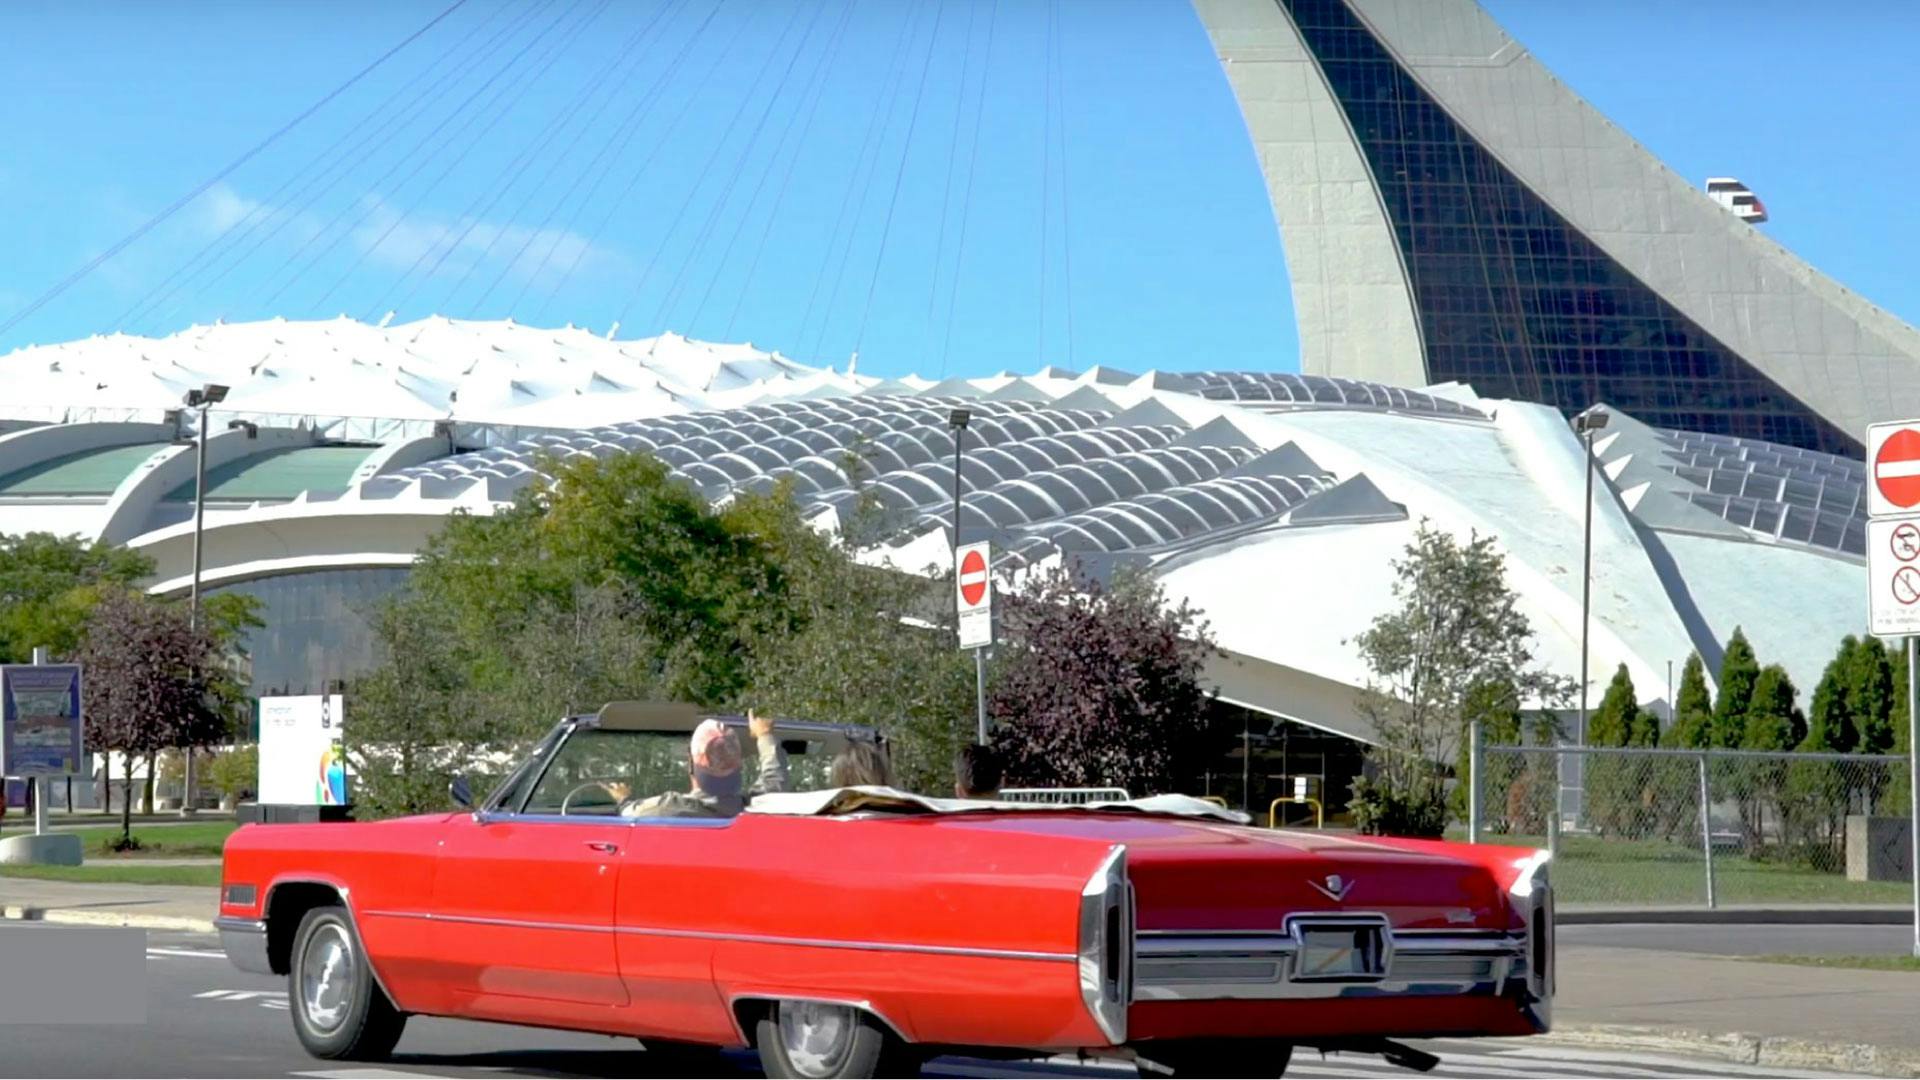 2-hour guided tour of Montréal in a convertible Cadillac